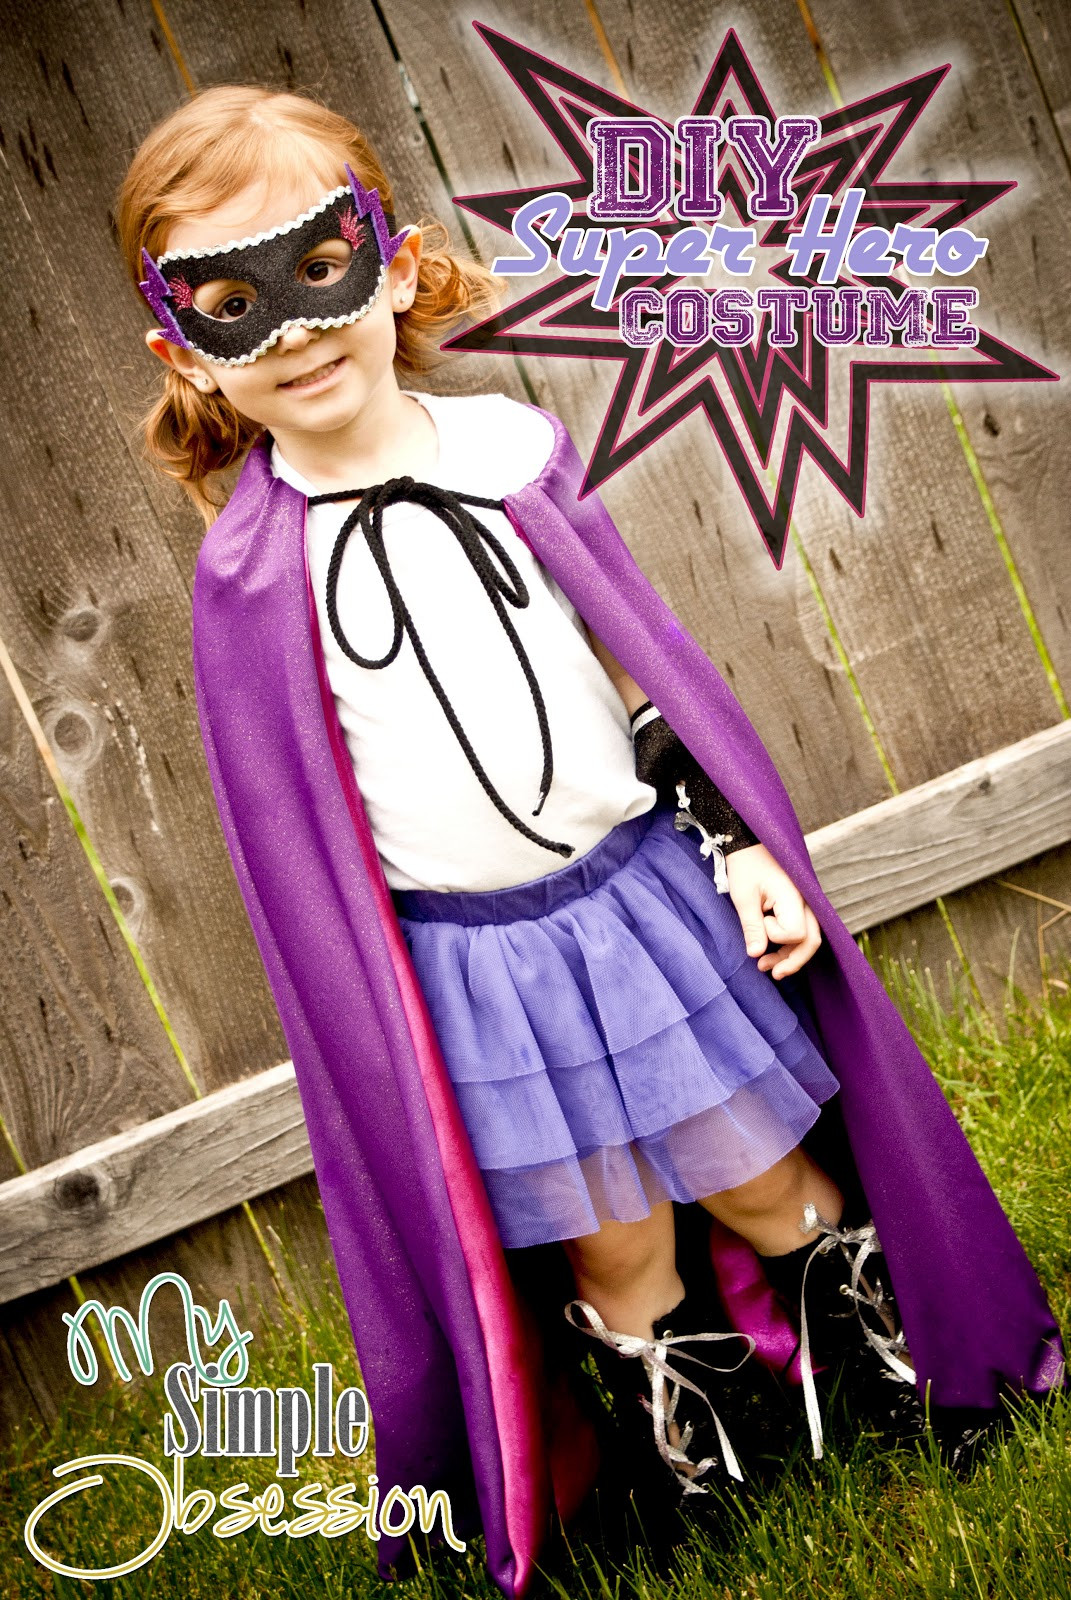 Best ideas about DIY Superhero Costume
. Save or Pin My Simple Obsession DIY Super Hero Costume Now.